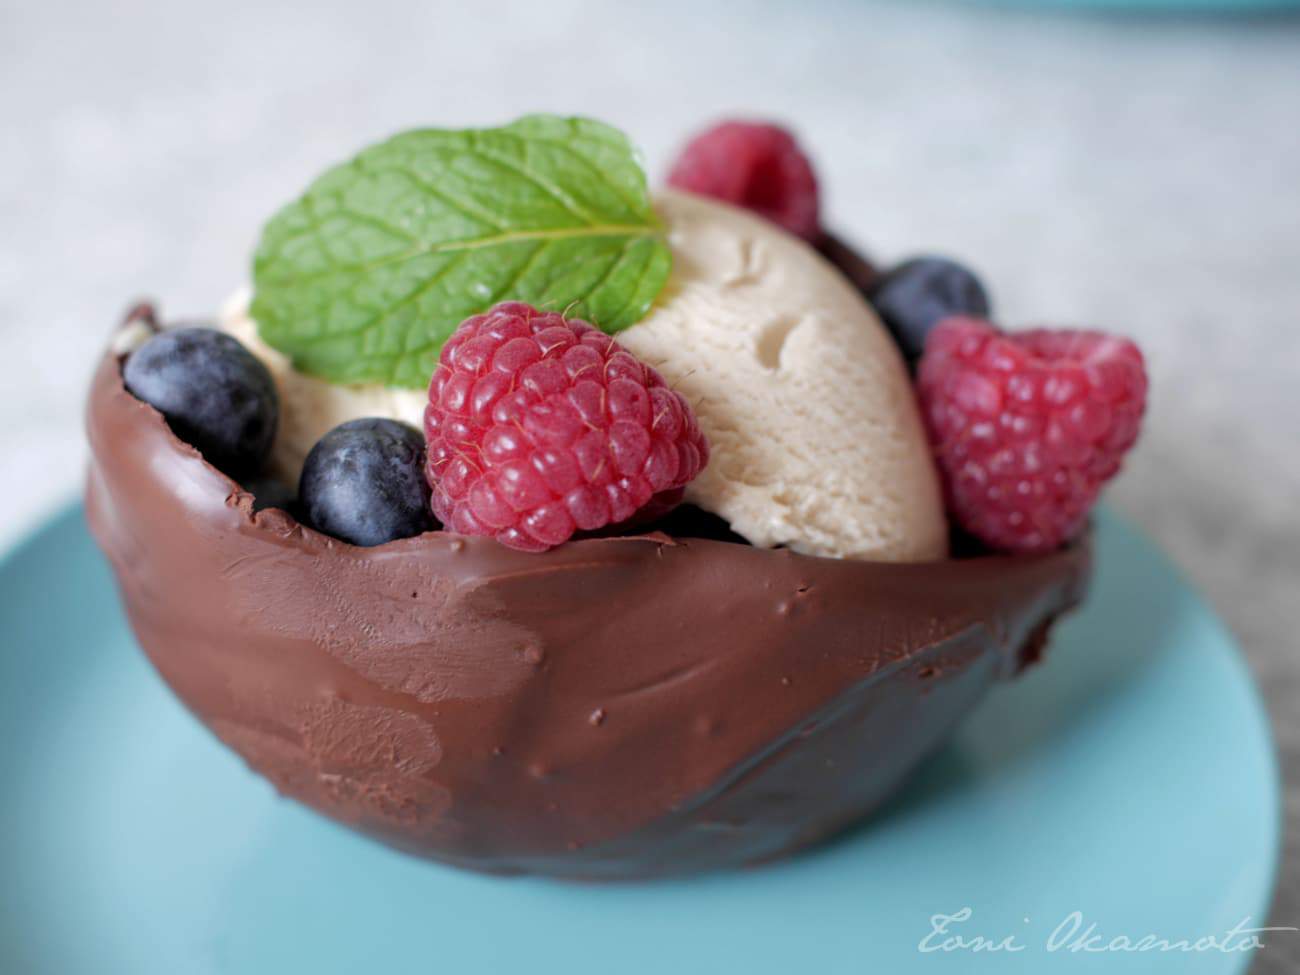 vegan chocolate bowl filled with vanilla ice cream and garnished with blueberries, raspberries, and a mint leaf